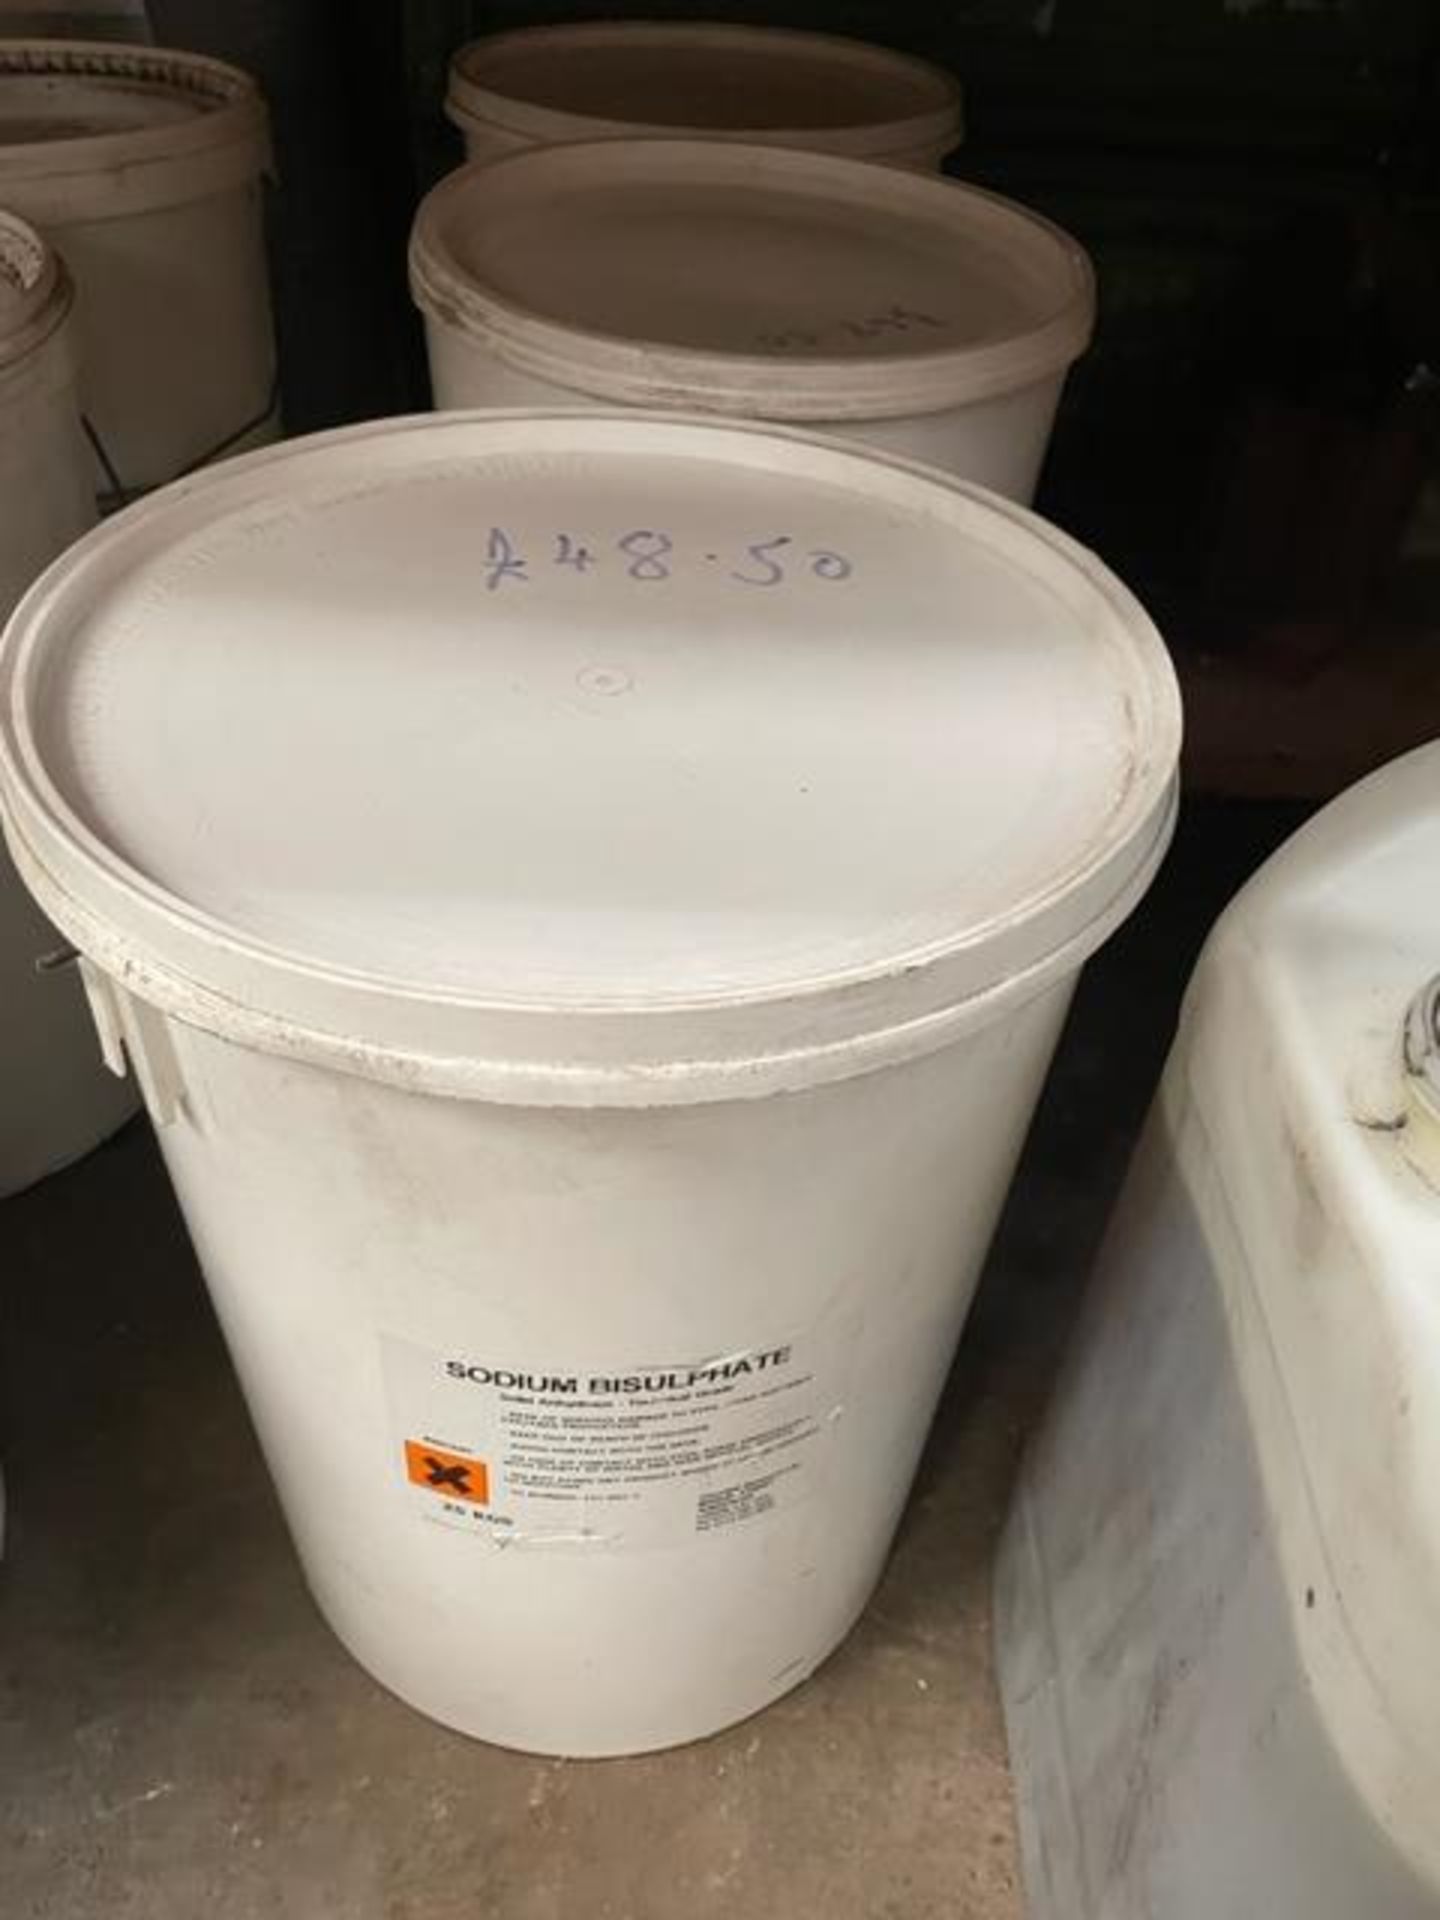 Sodium bisulphate 3 number tubs again expensive to purchase - Image 2 of 2